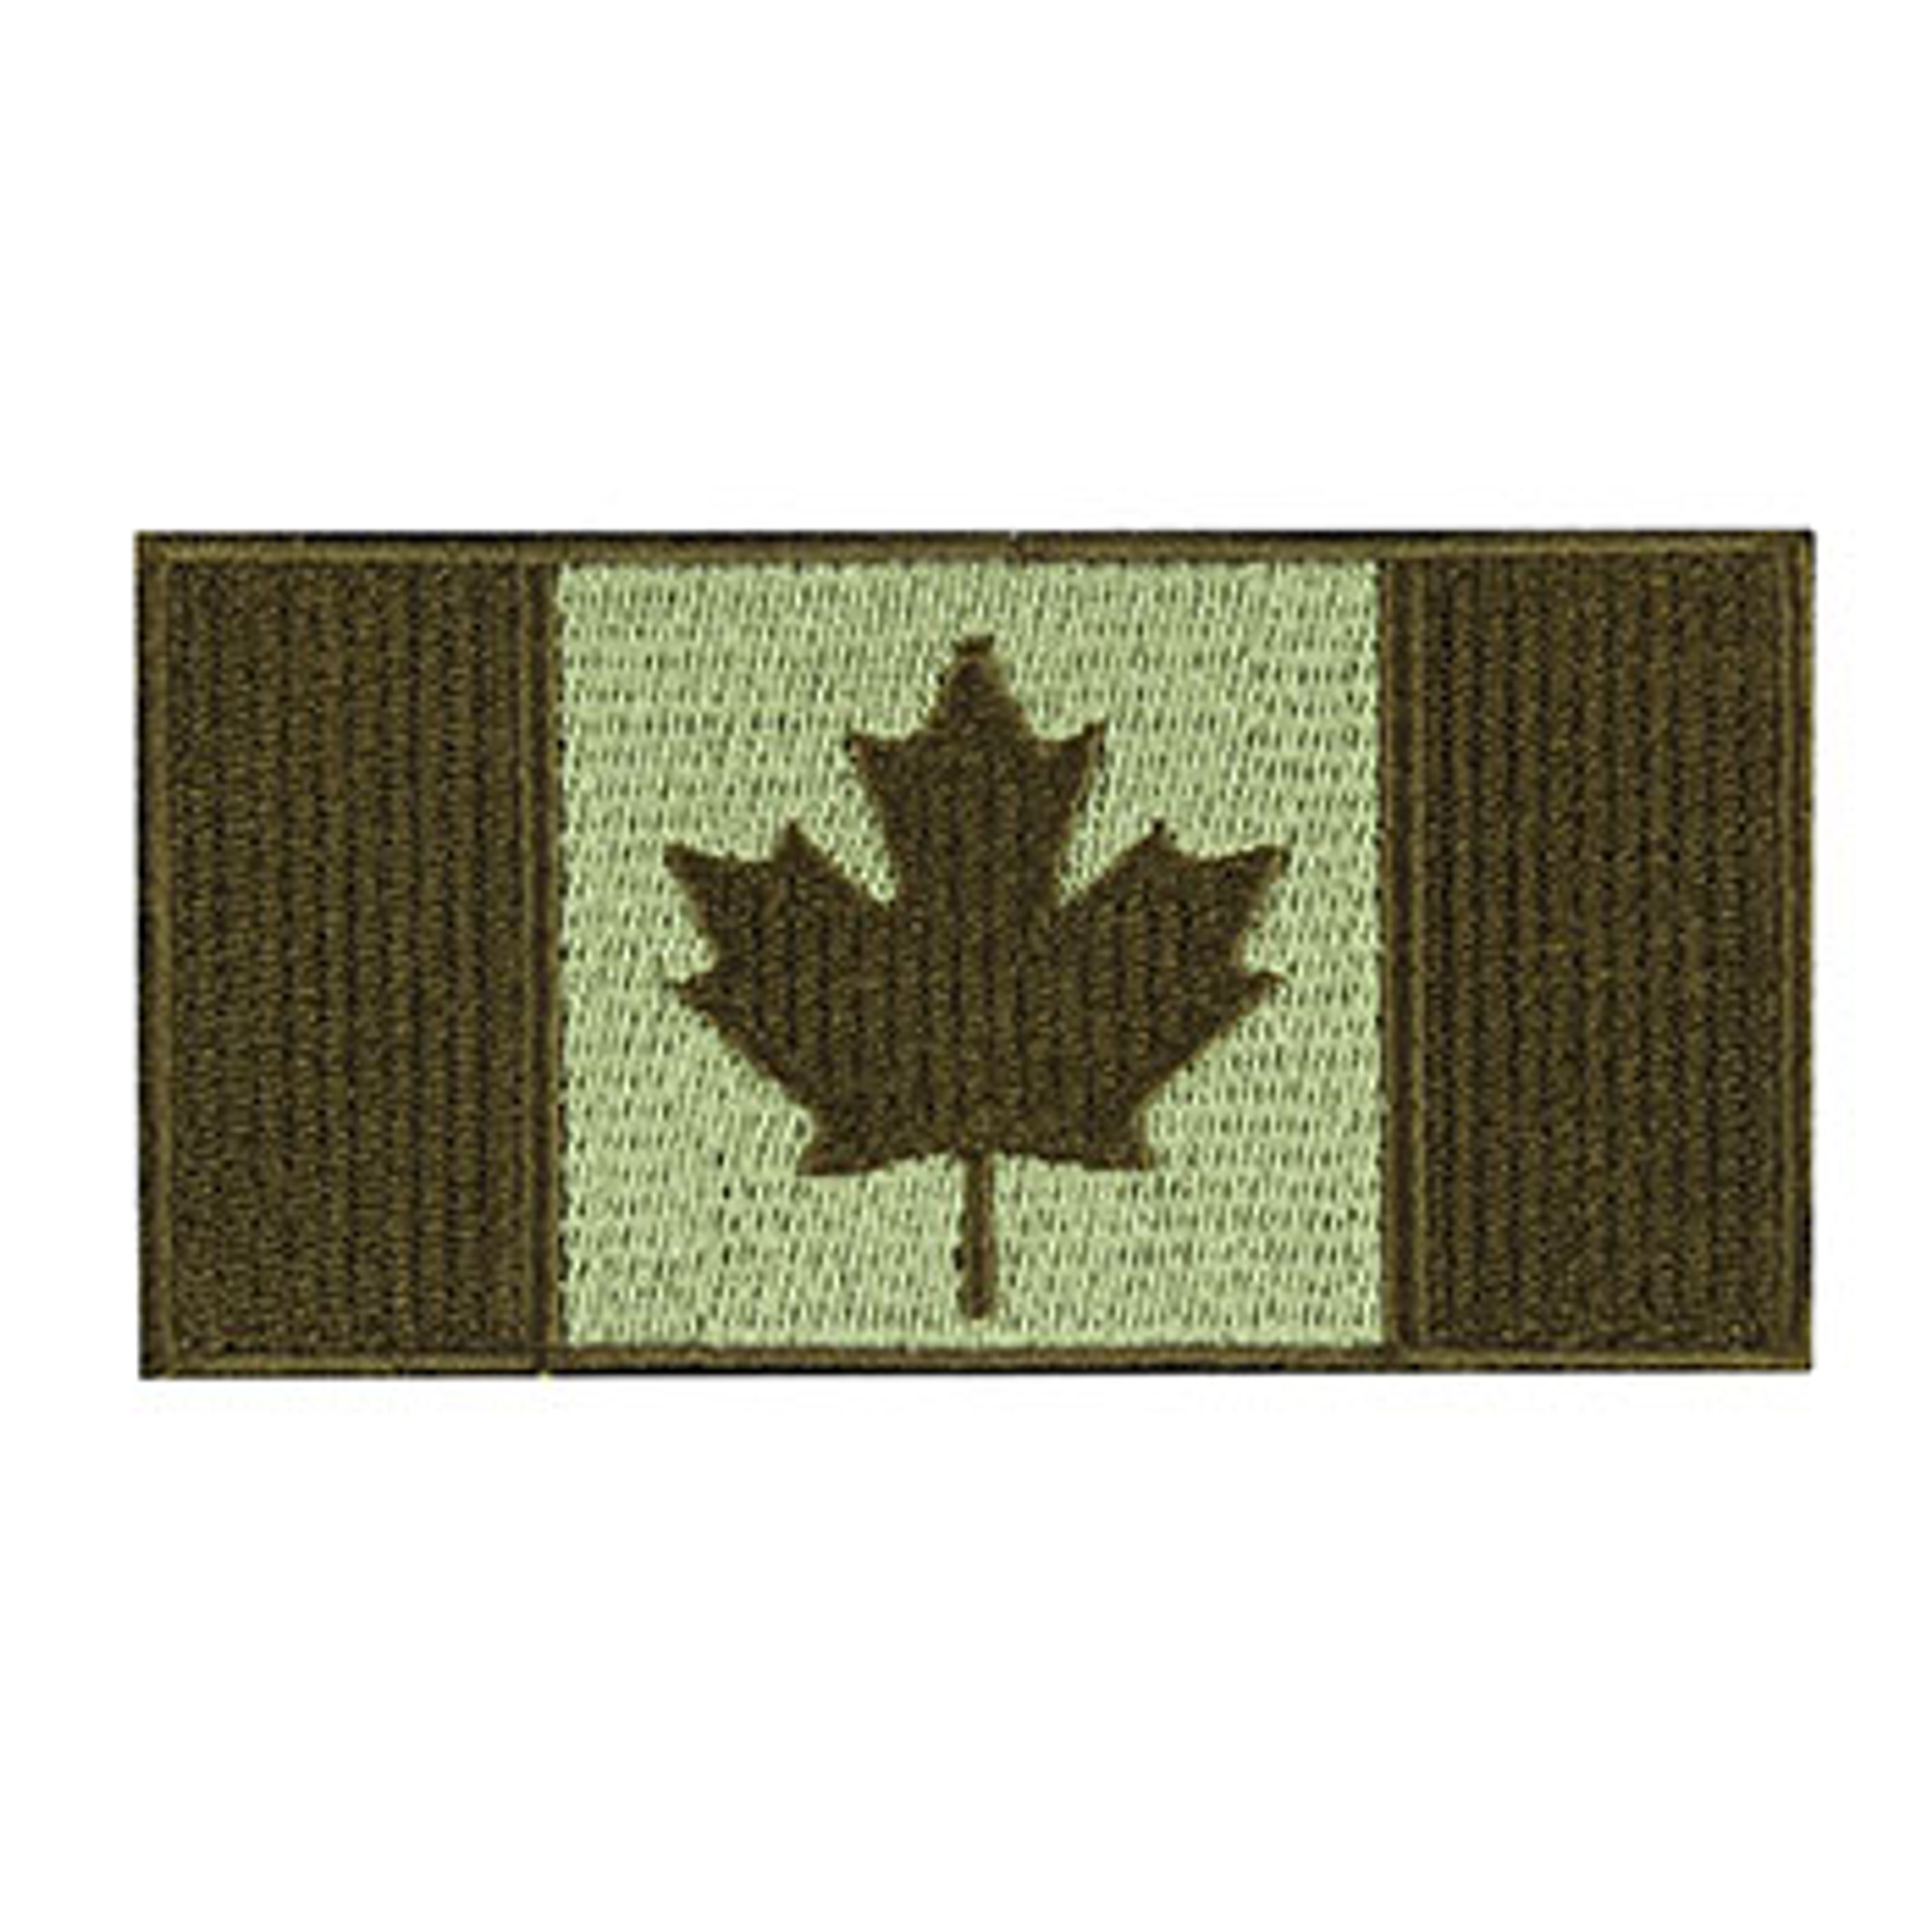 Canadian Flag 4"x2" Morale Patch - Olive